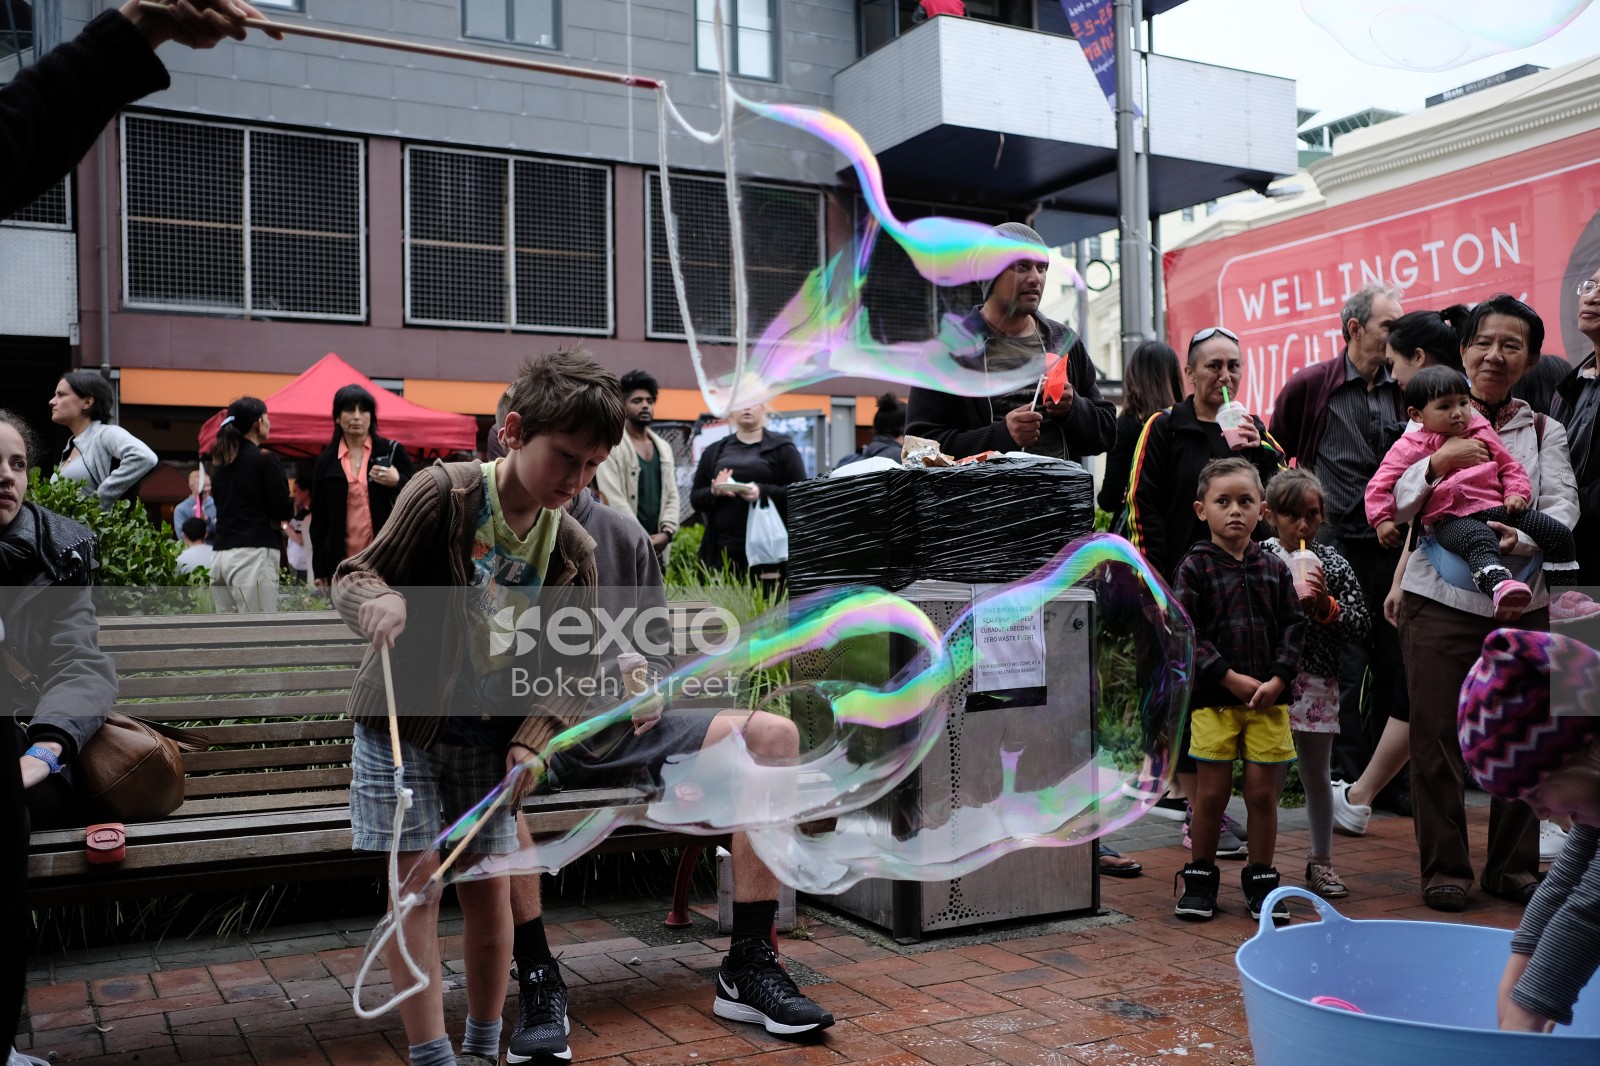 Street performer with bubbles